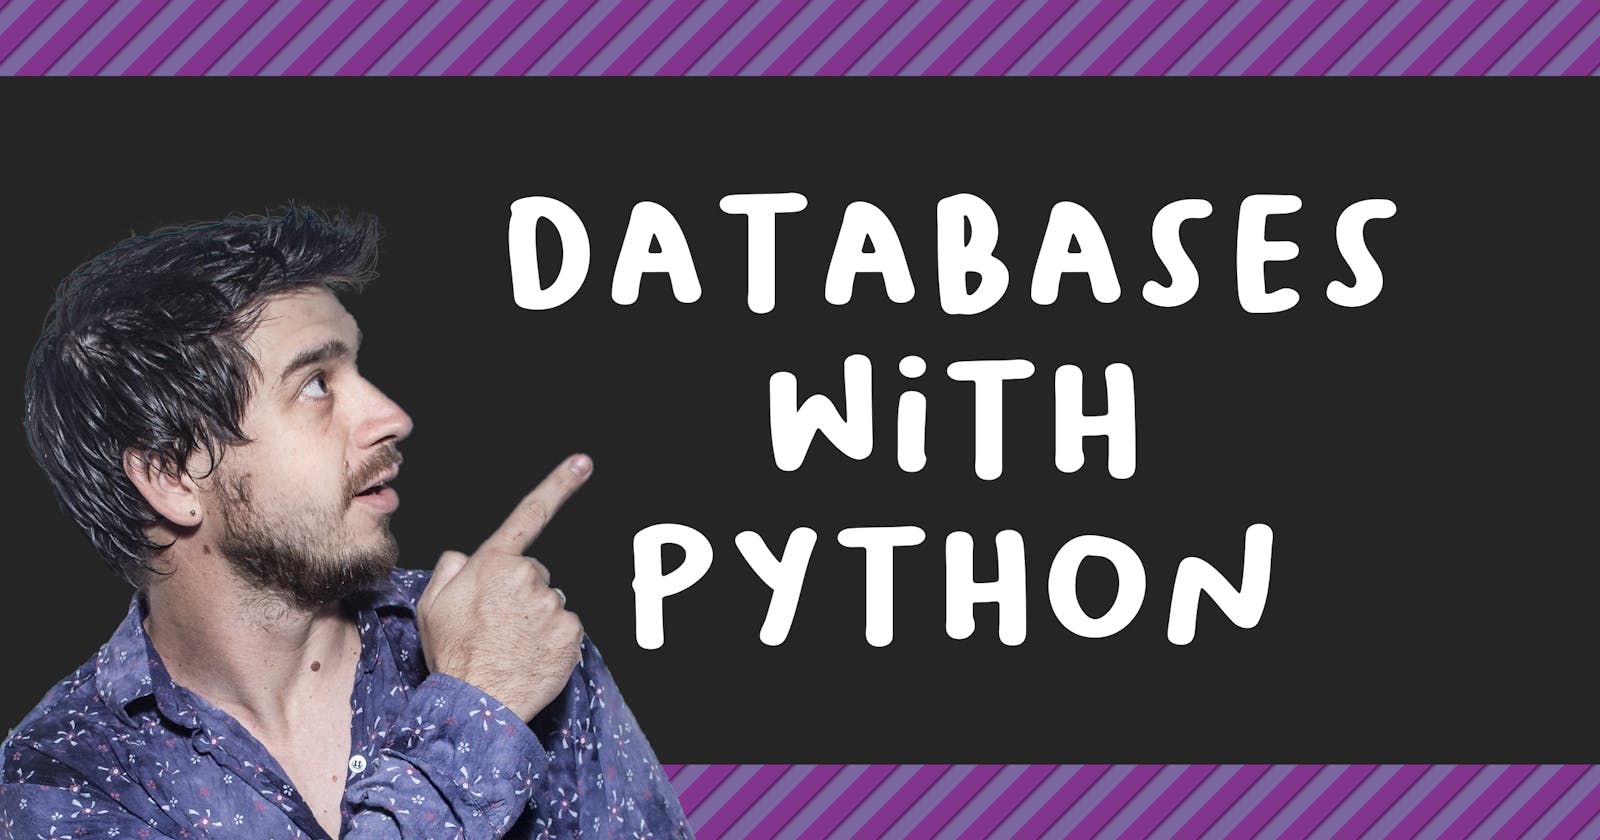 Create your database using Python and SQLite